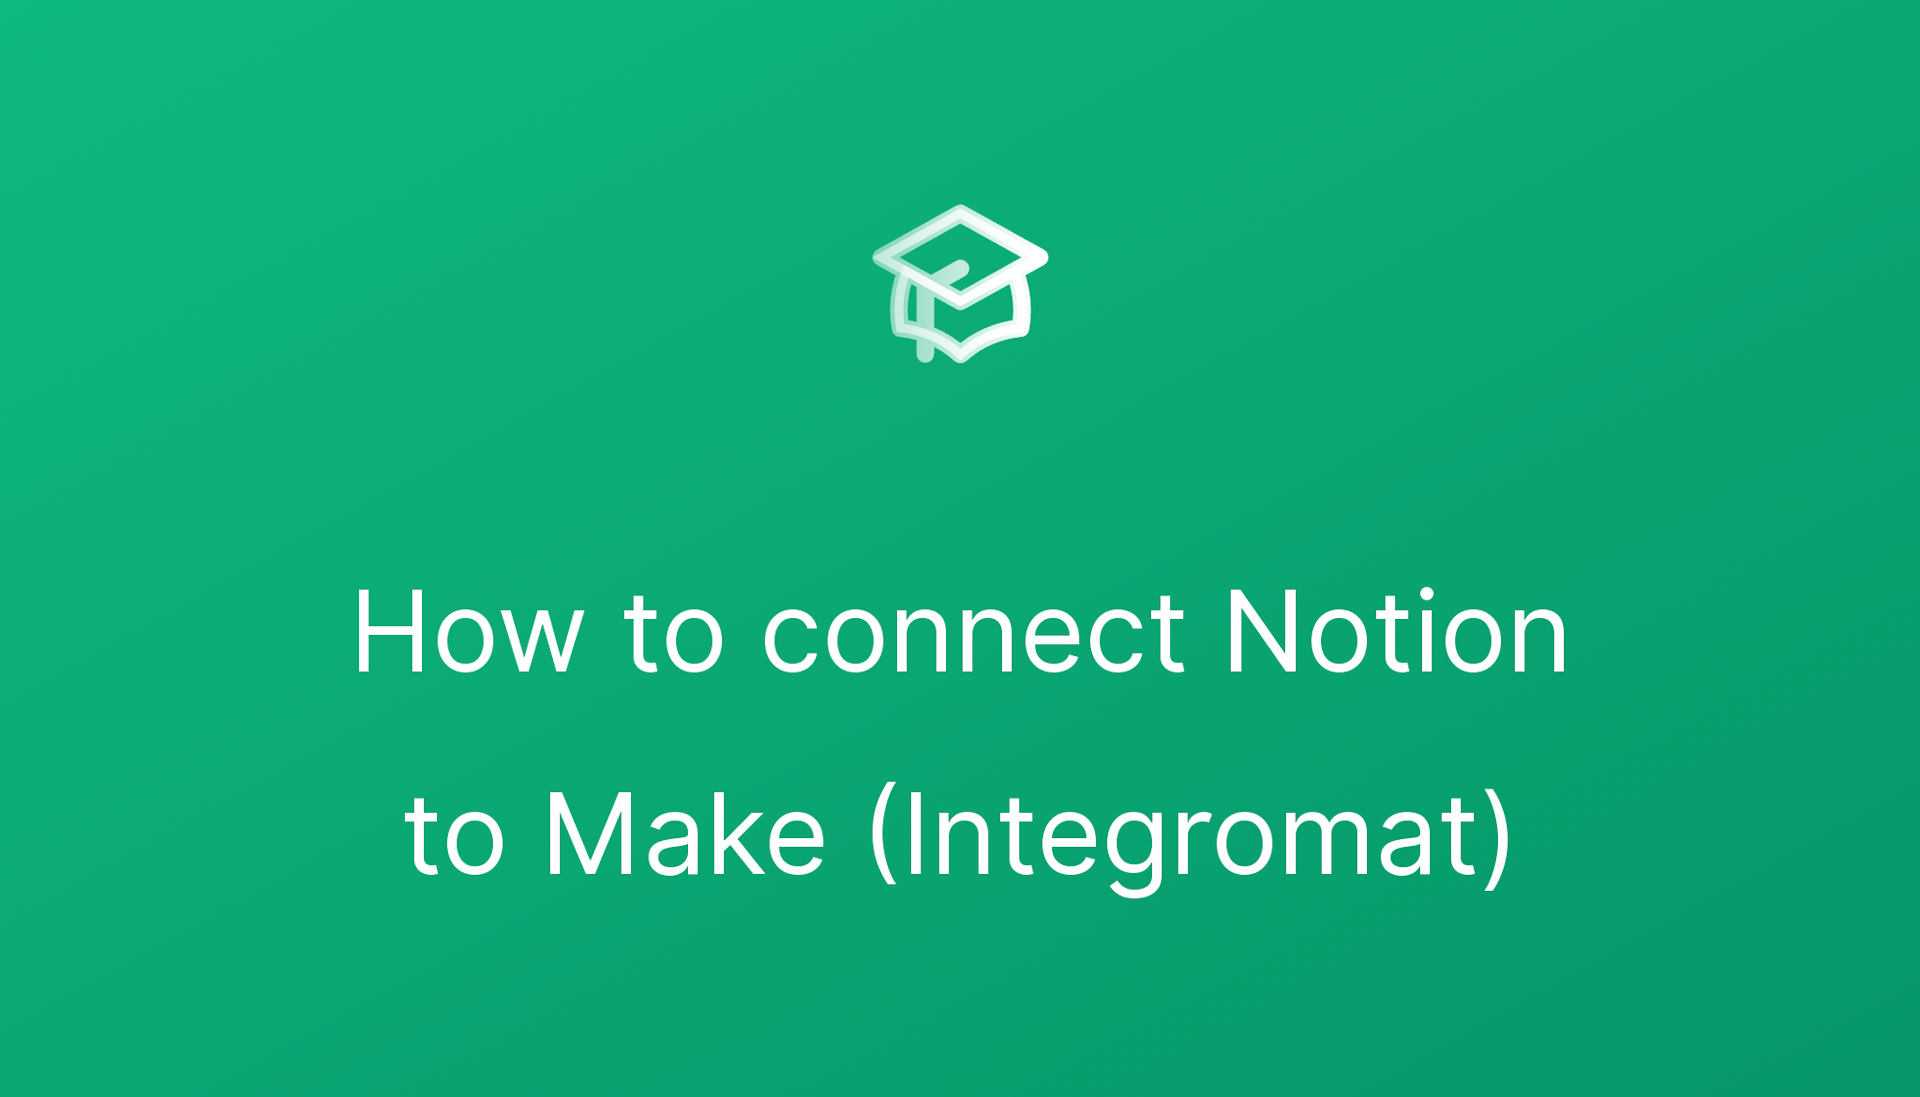 How to connect Notion to Make (Integromat)